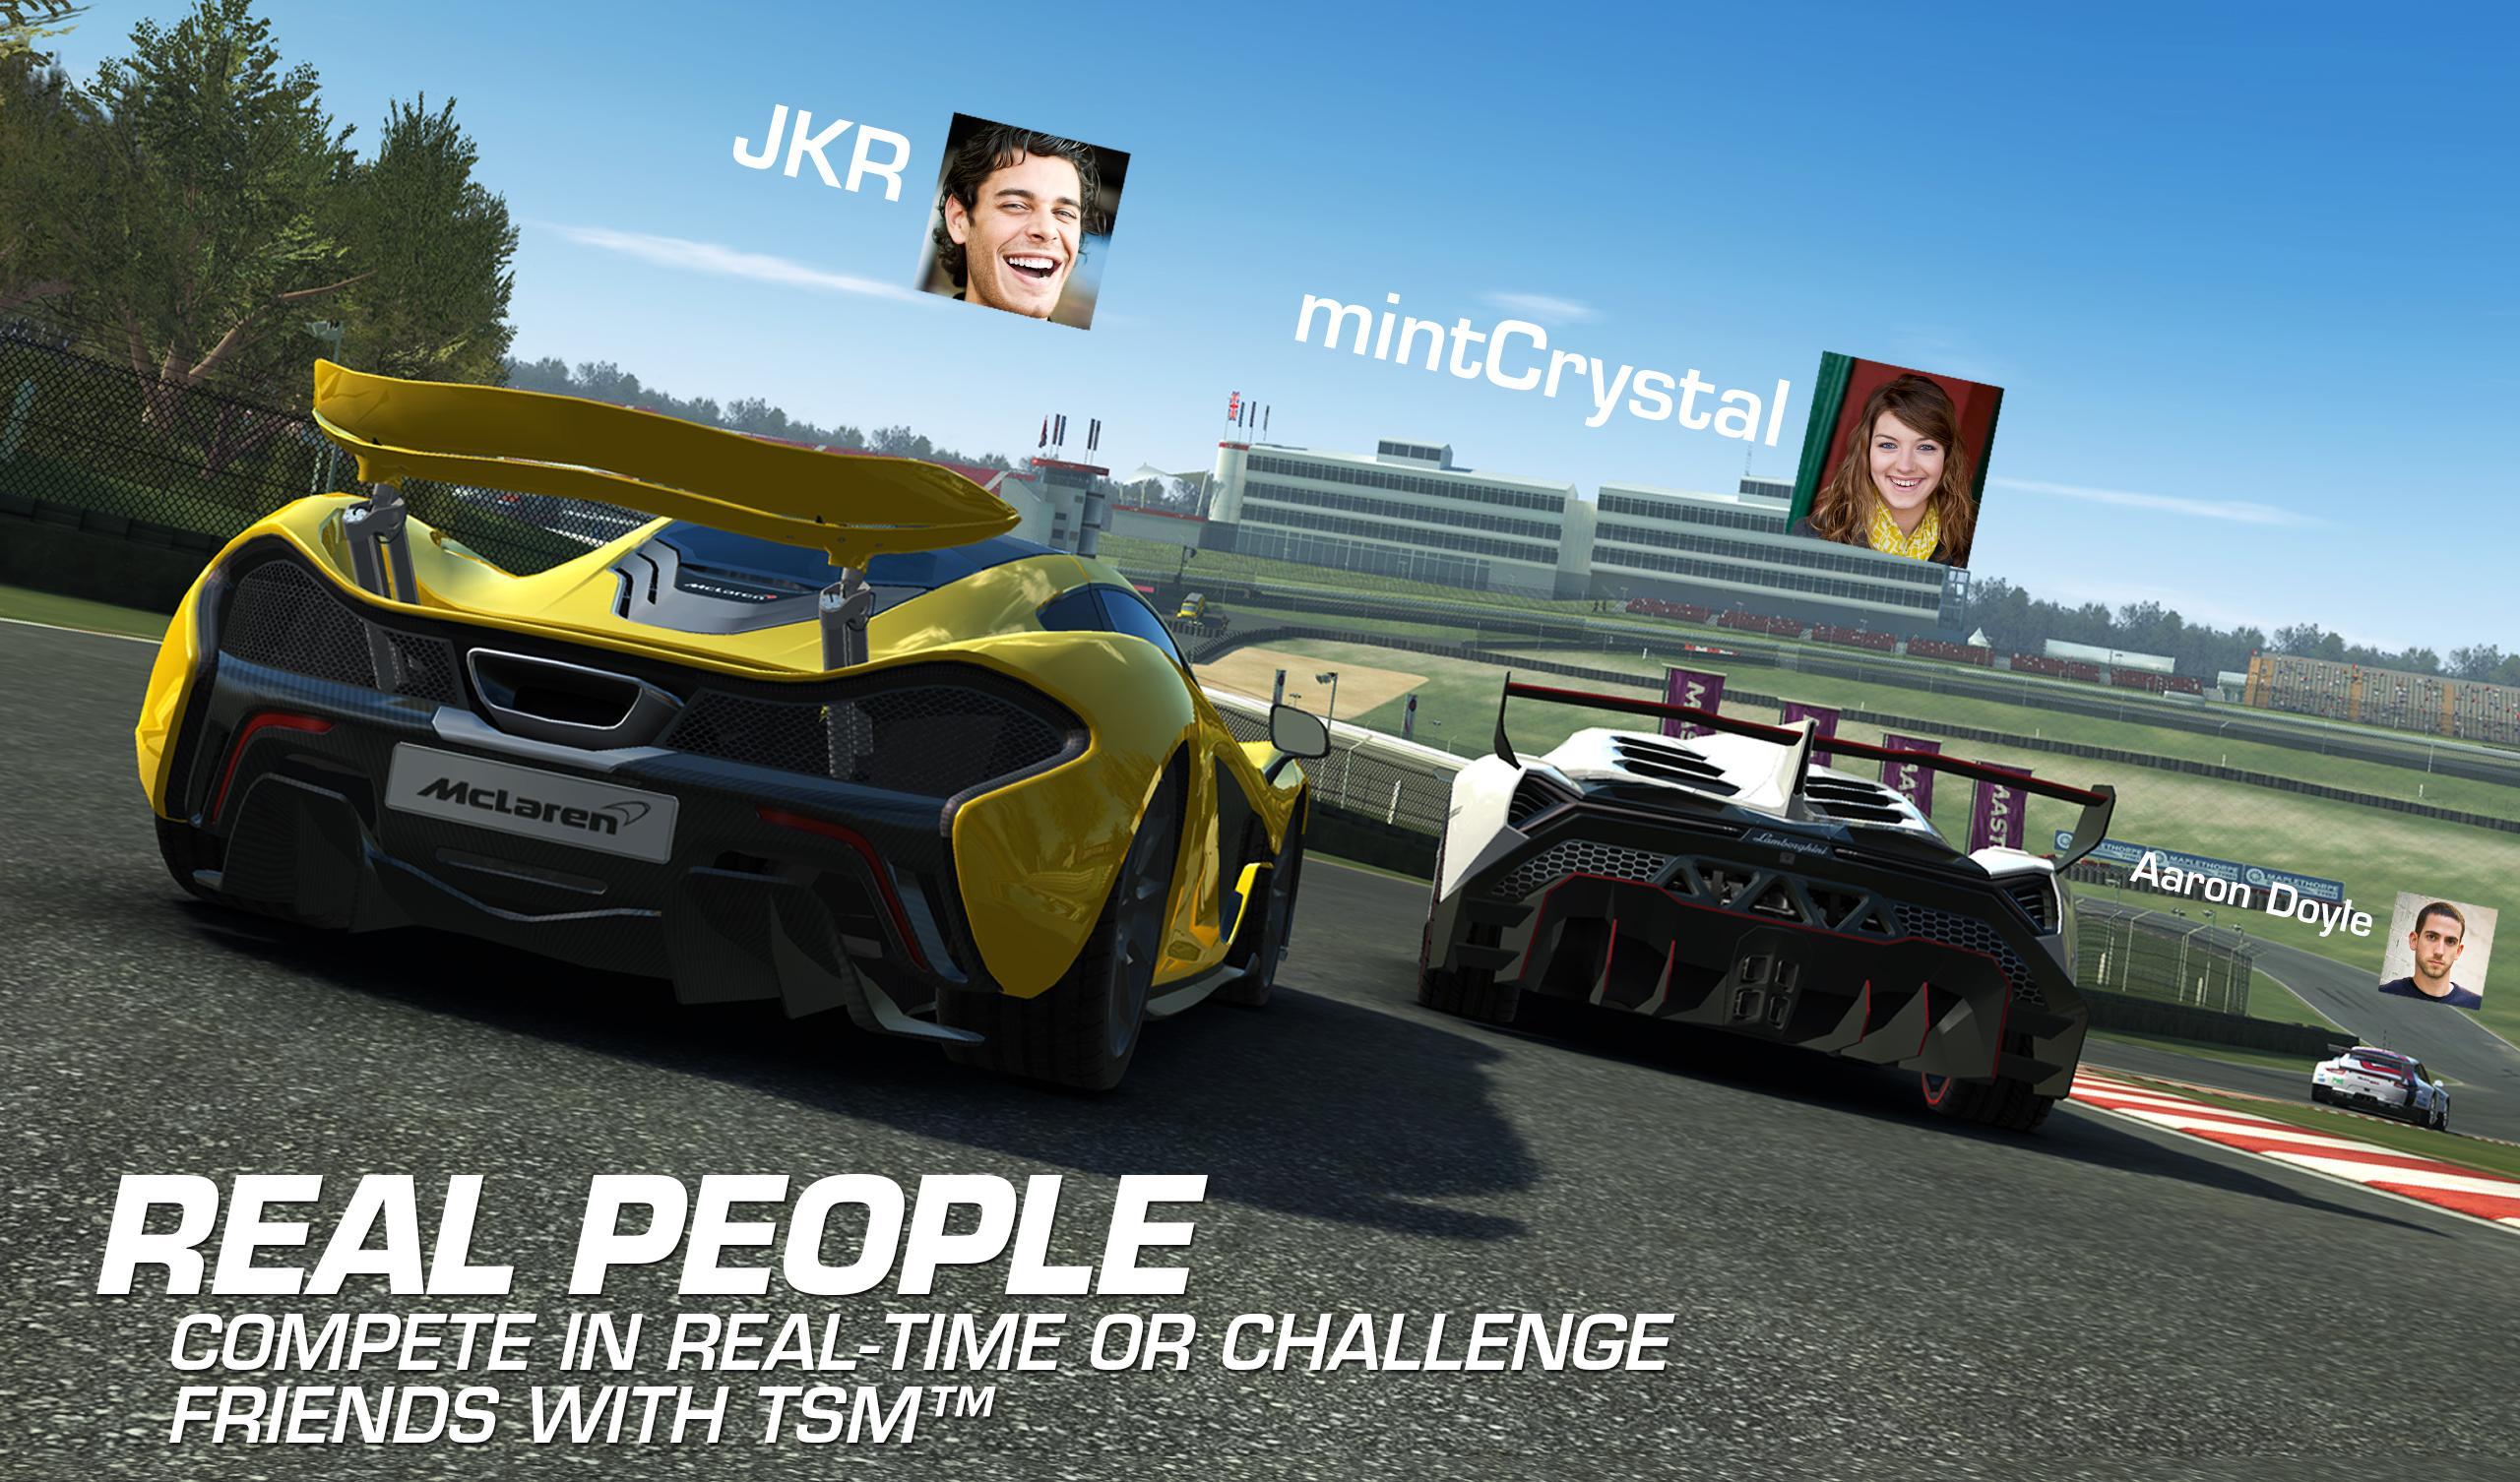 Real Racing 3 Mod apk [Unlimited money] download - Real Racing 3